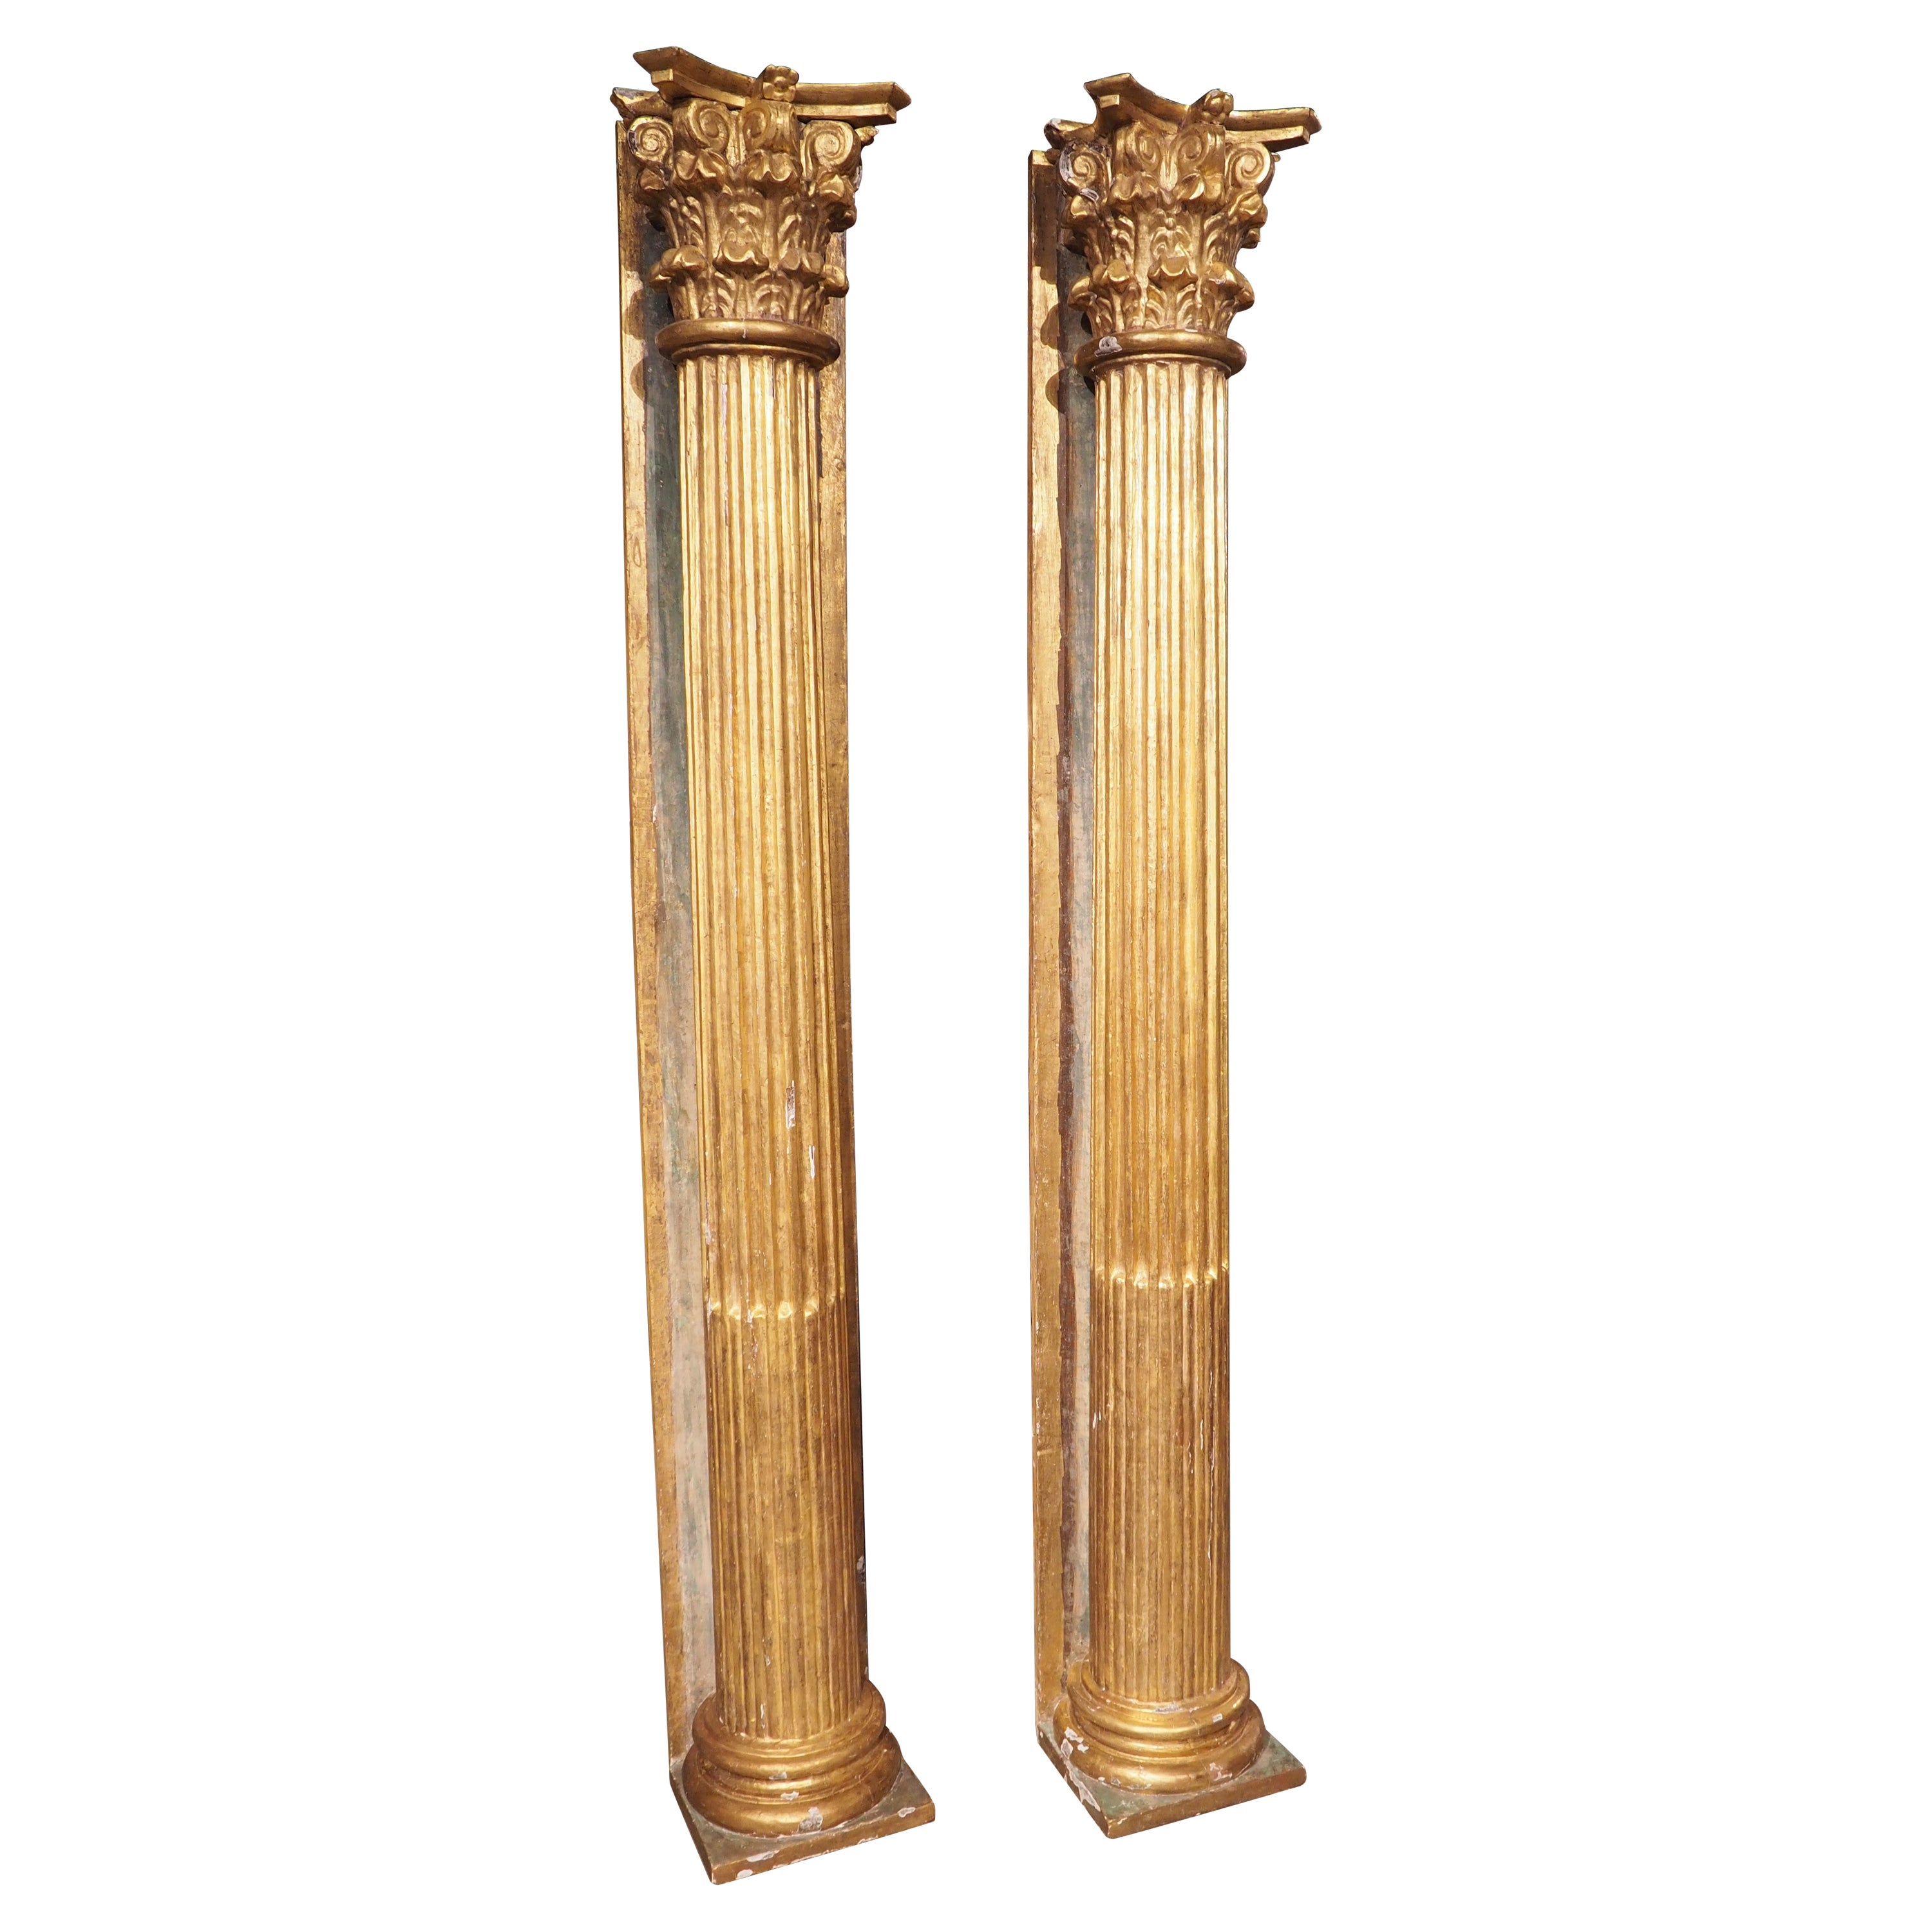 Pair of Tall French Neoclassical Giltwood Columns, Circa 1810